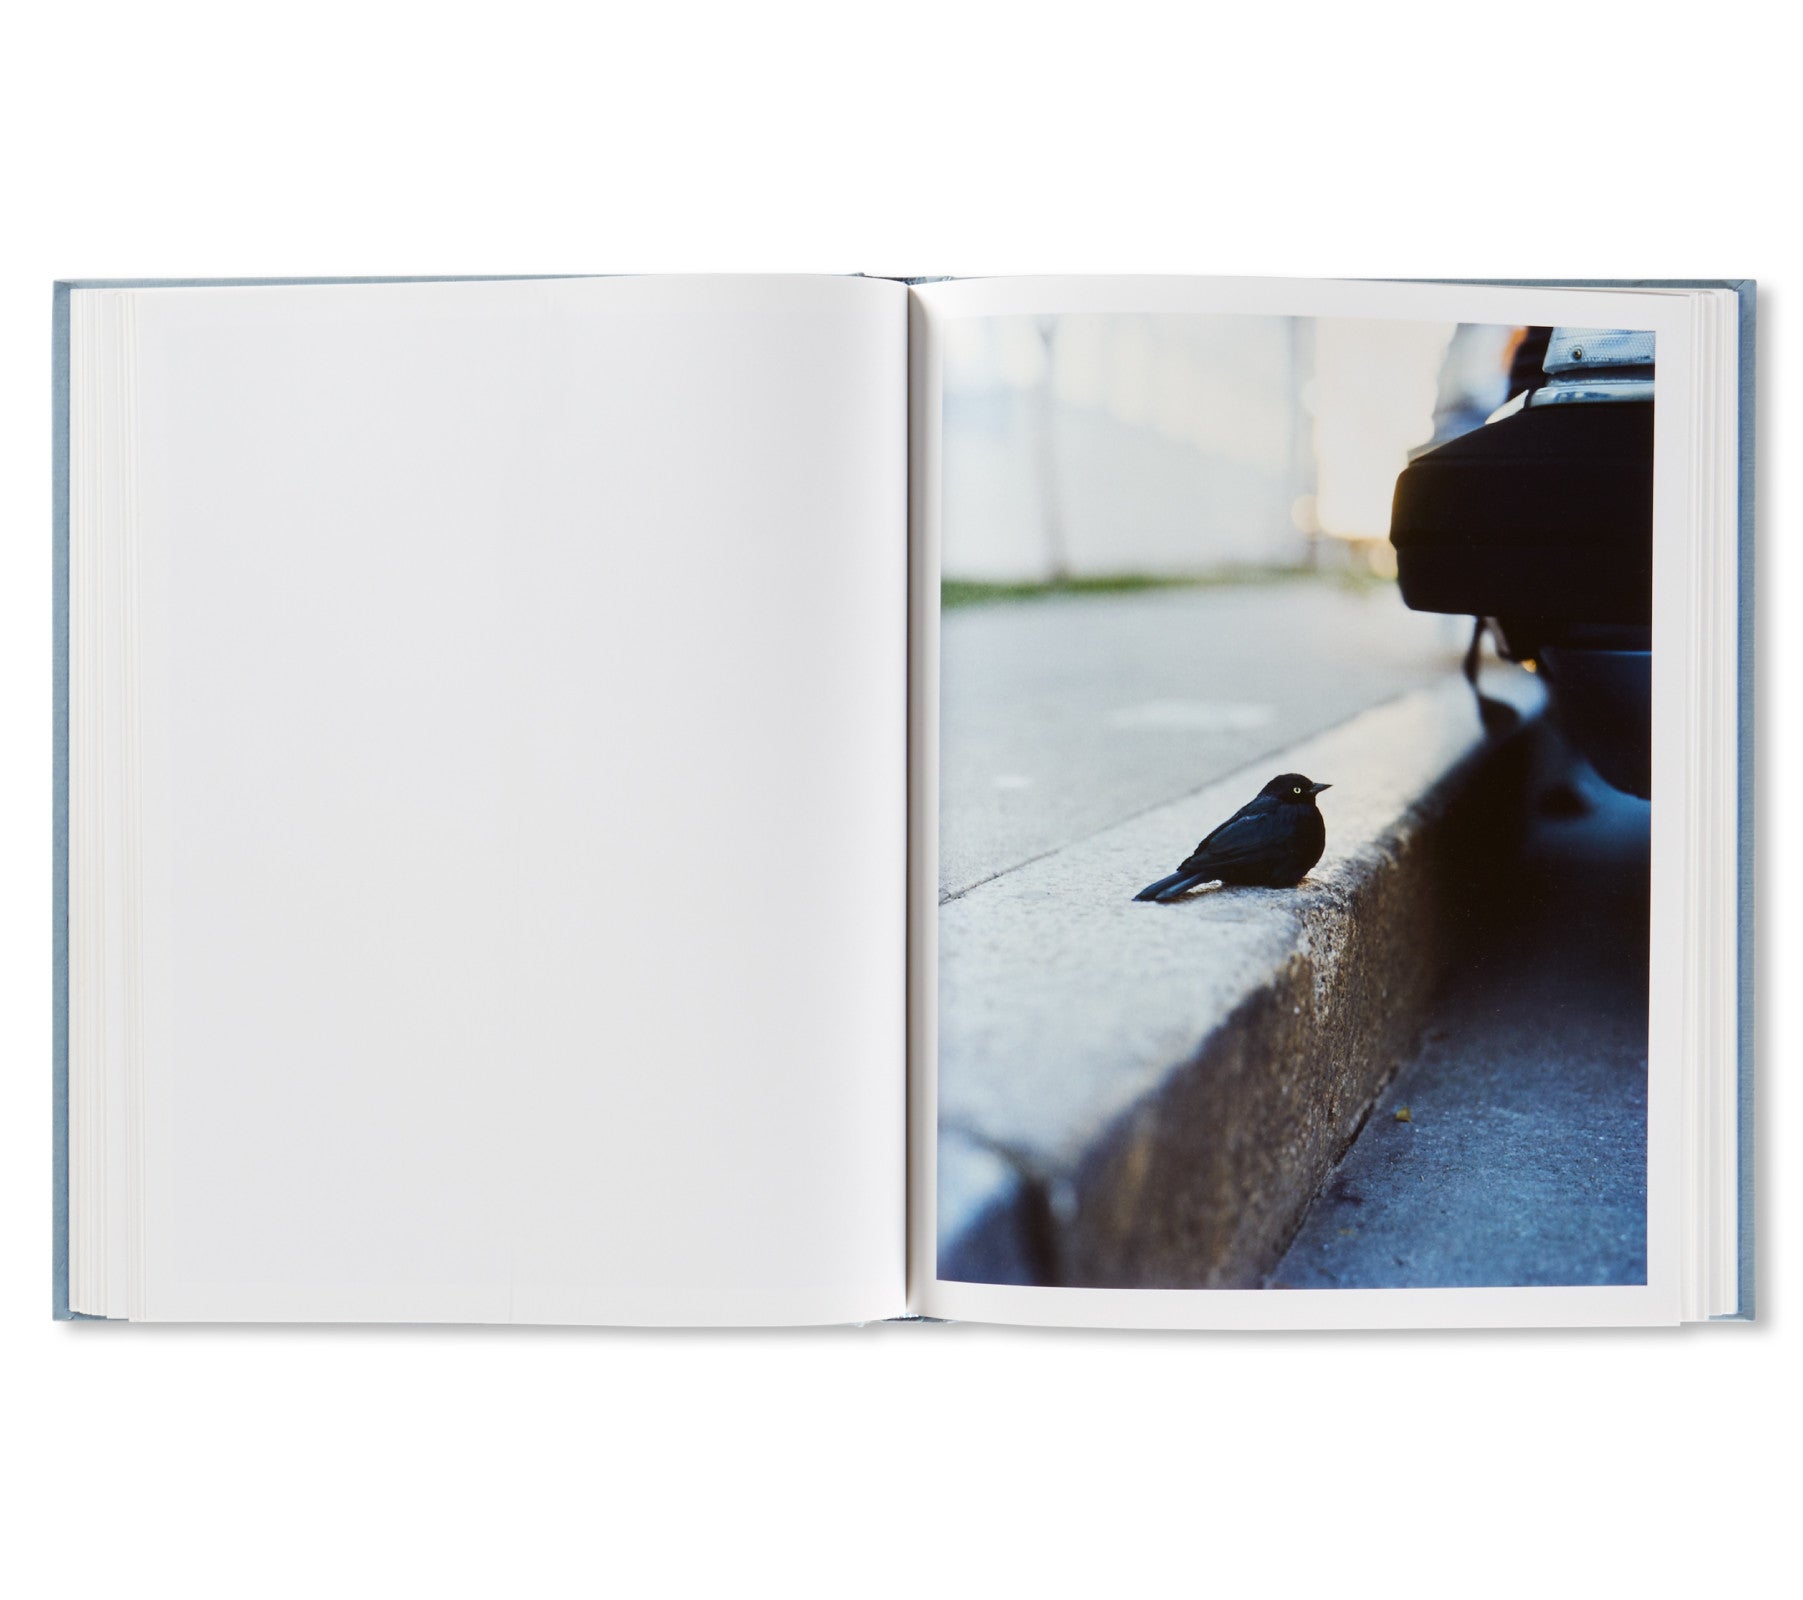 ZZYZX by Gregory Halpern [FIRST EDITION, FIRST PRINTING]